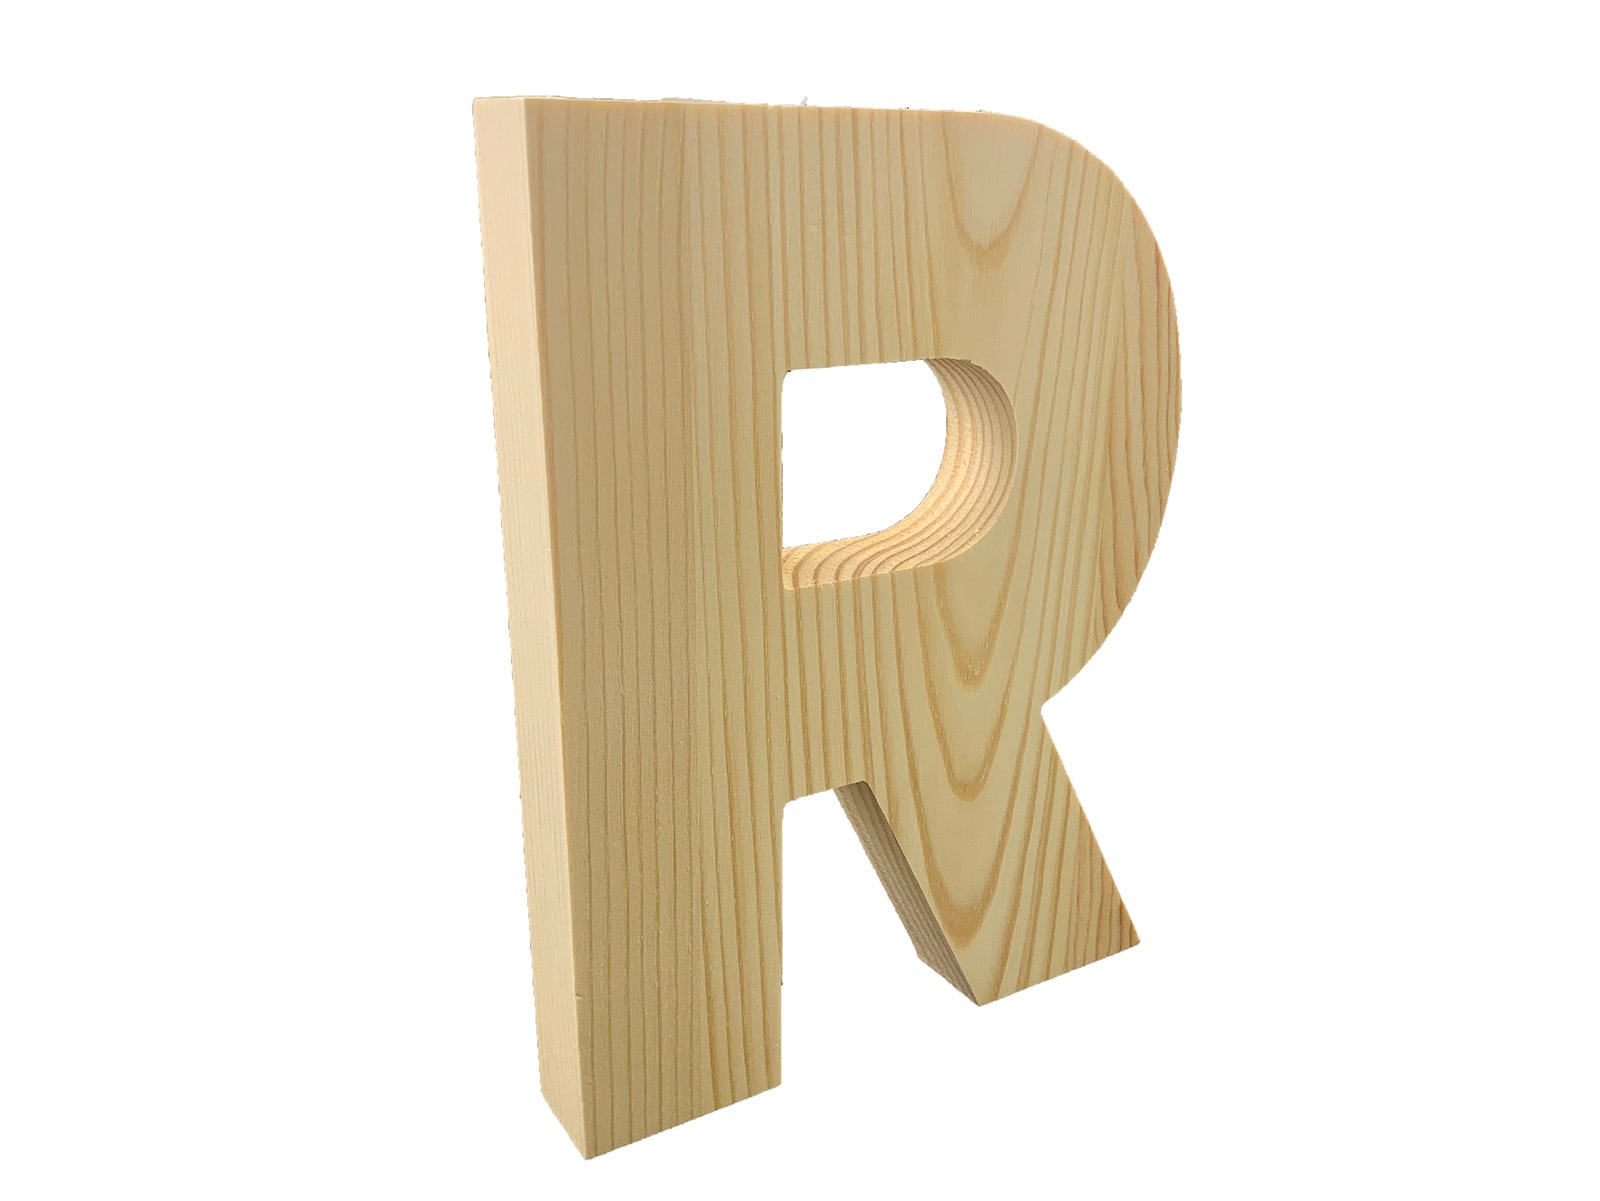 Hampton Art Wooden Letter J 8-in - Unfinished Pine Wood - DIY Craft  Supplies - Brown Color - Letter Cutout in the Craft Supplies department at